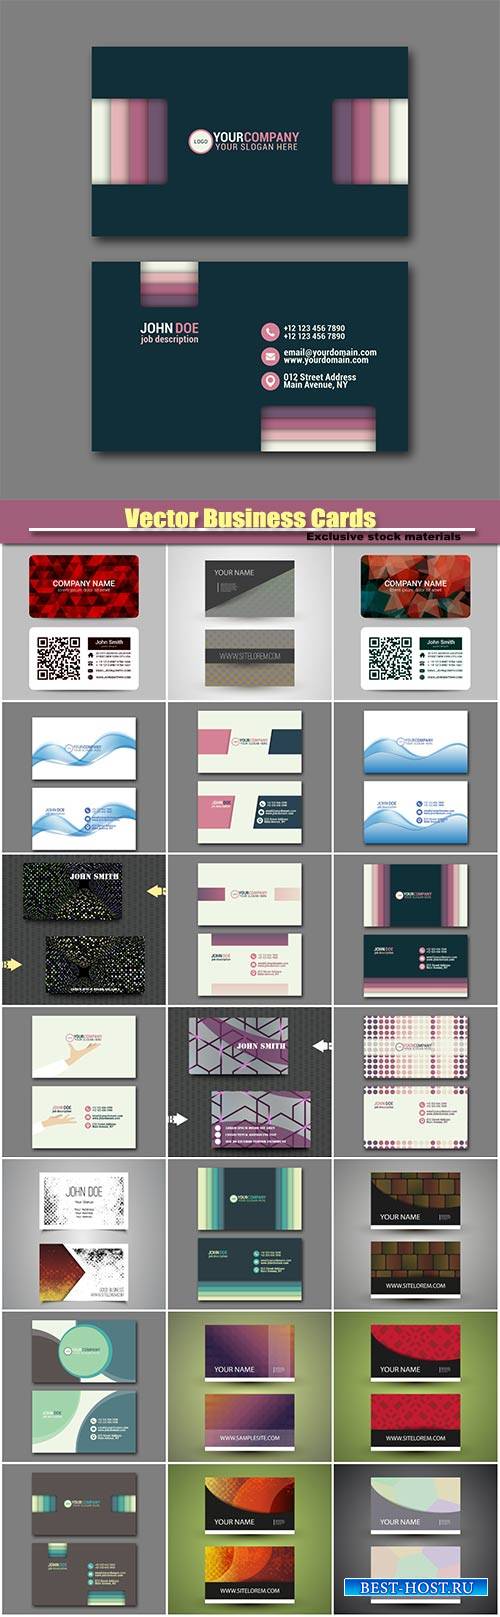 Stylish vector business cards